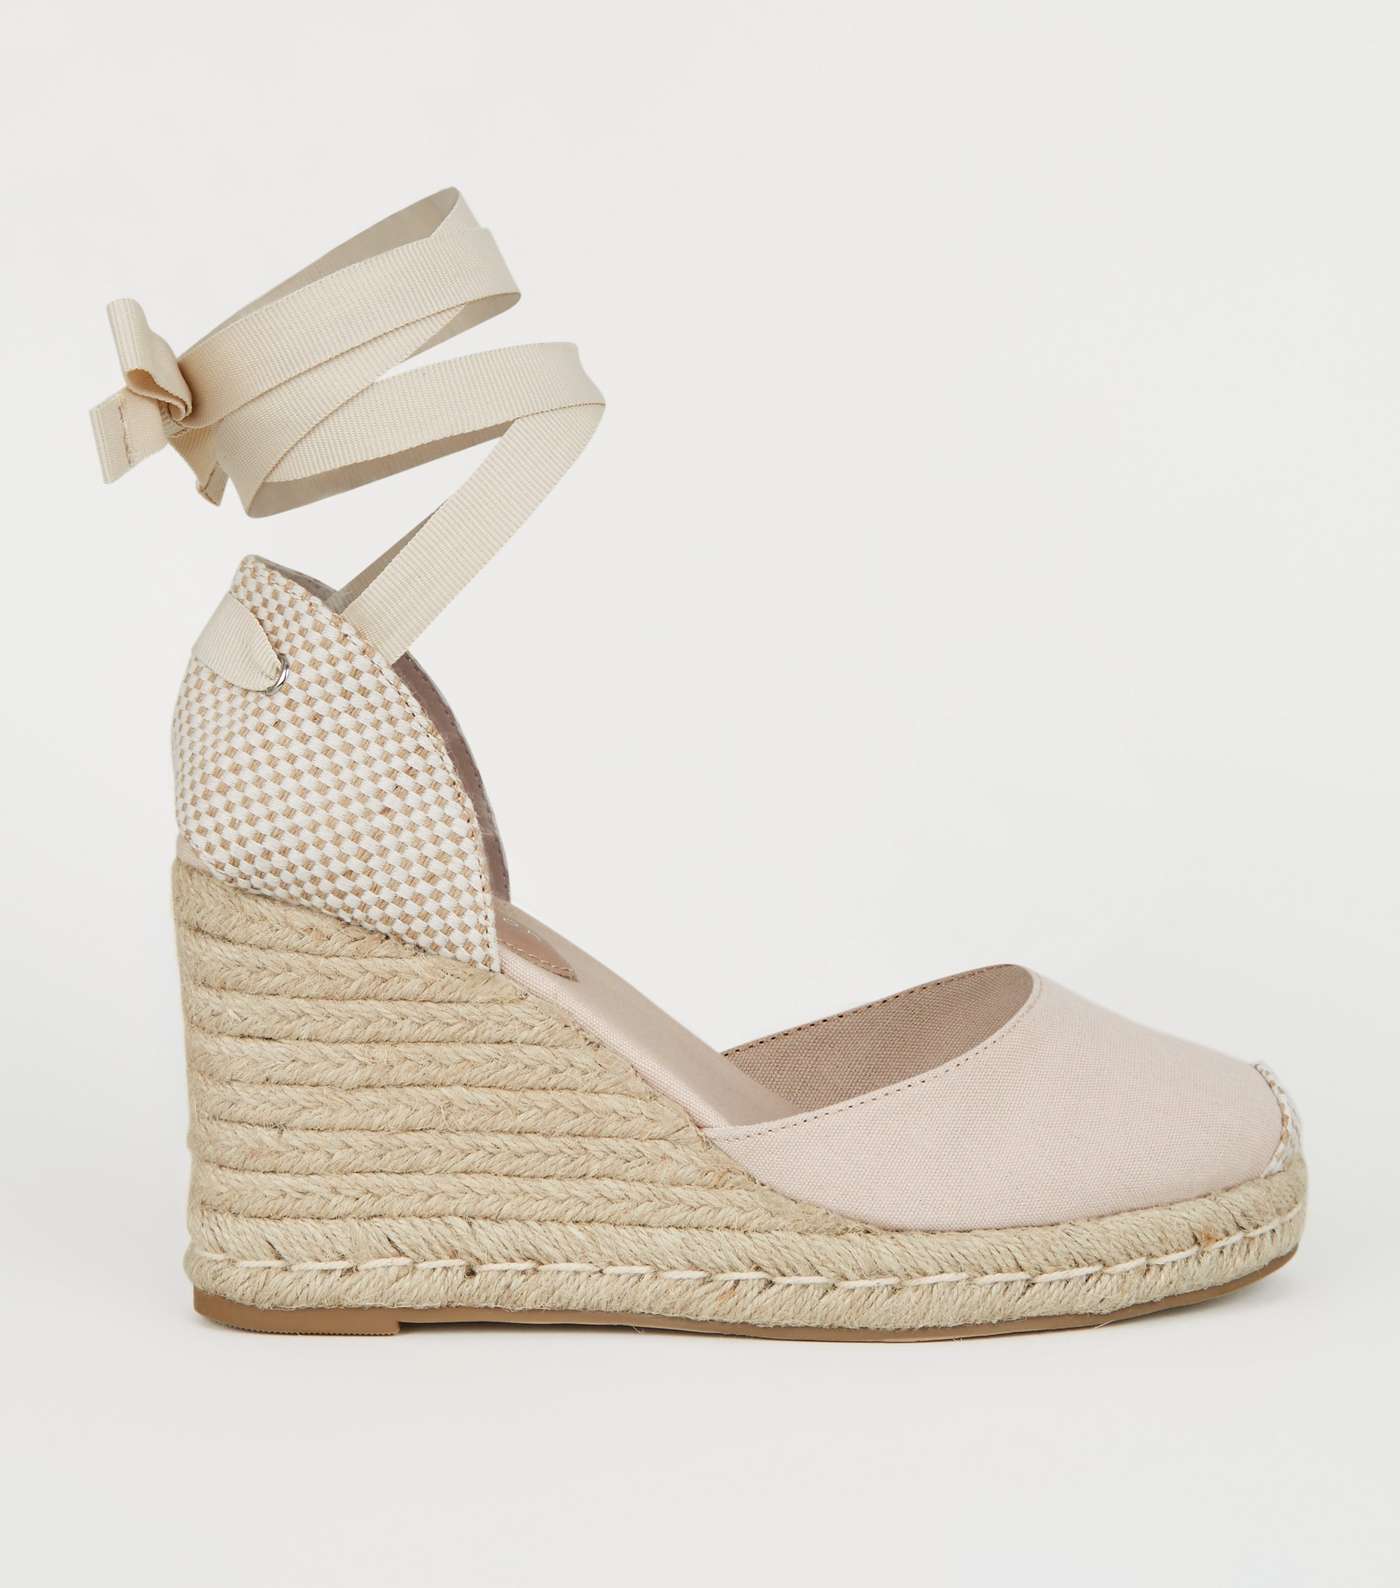 Nude Ribbon Ankle Tie Espadrille Wedges